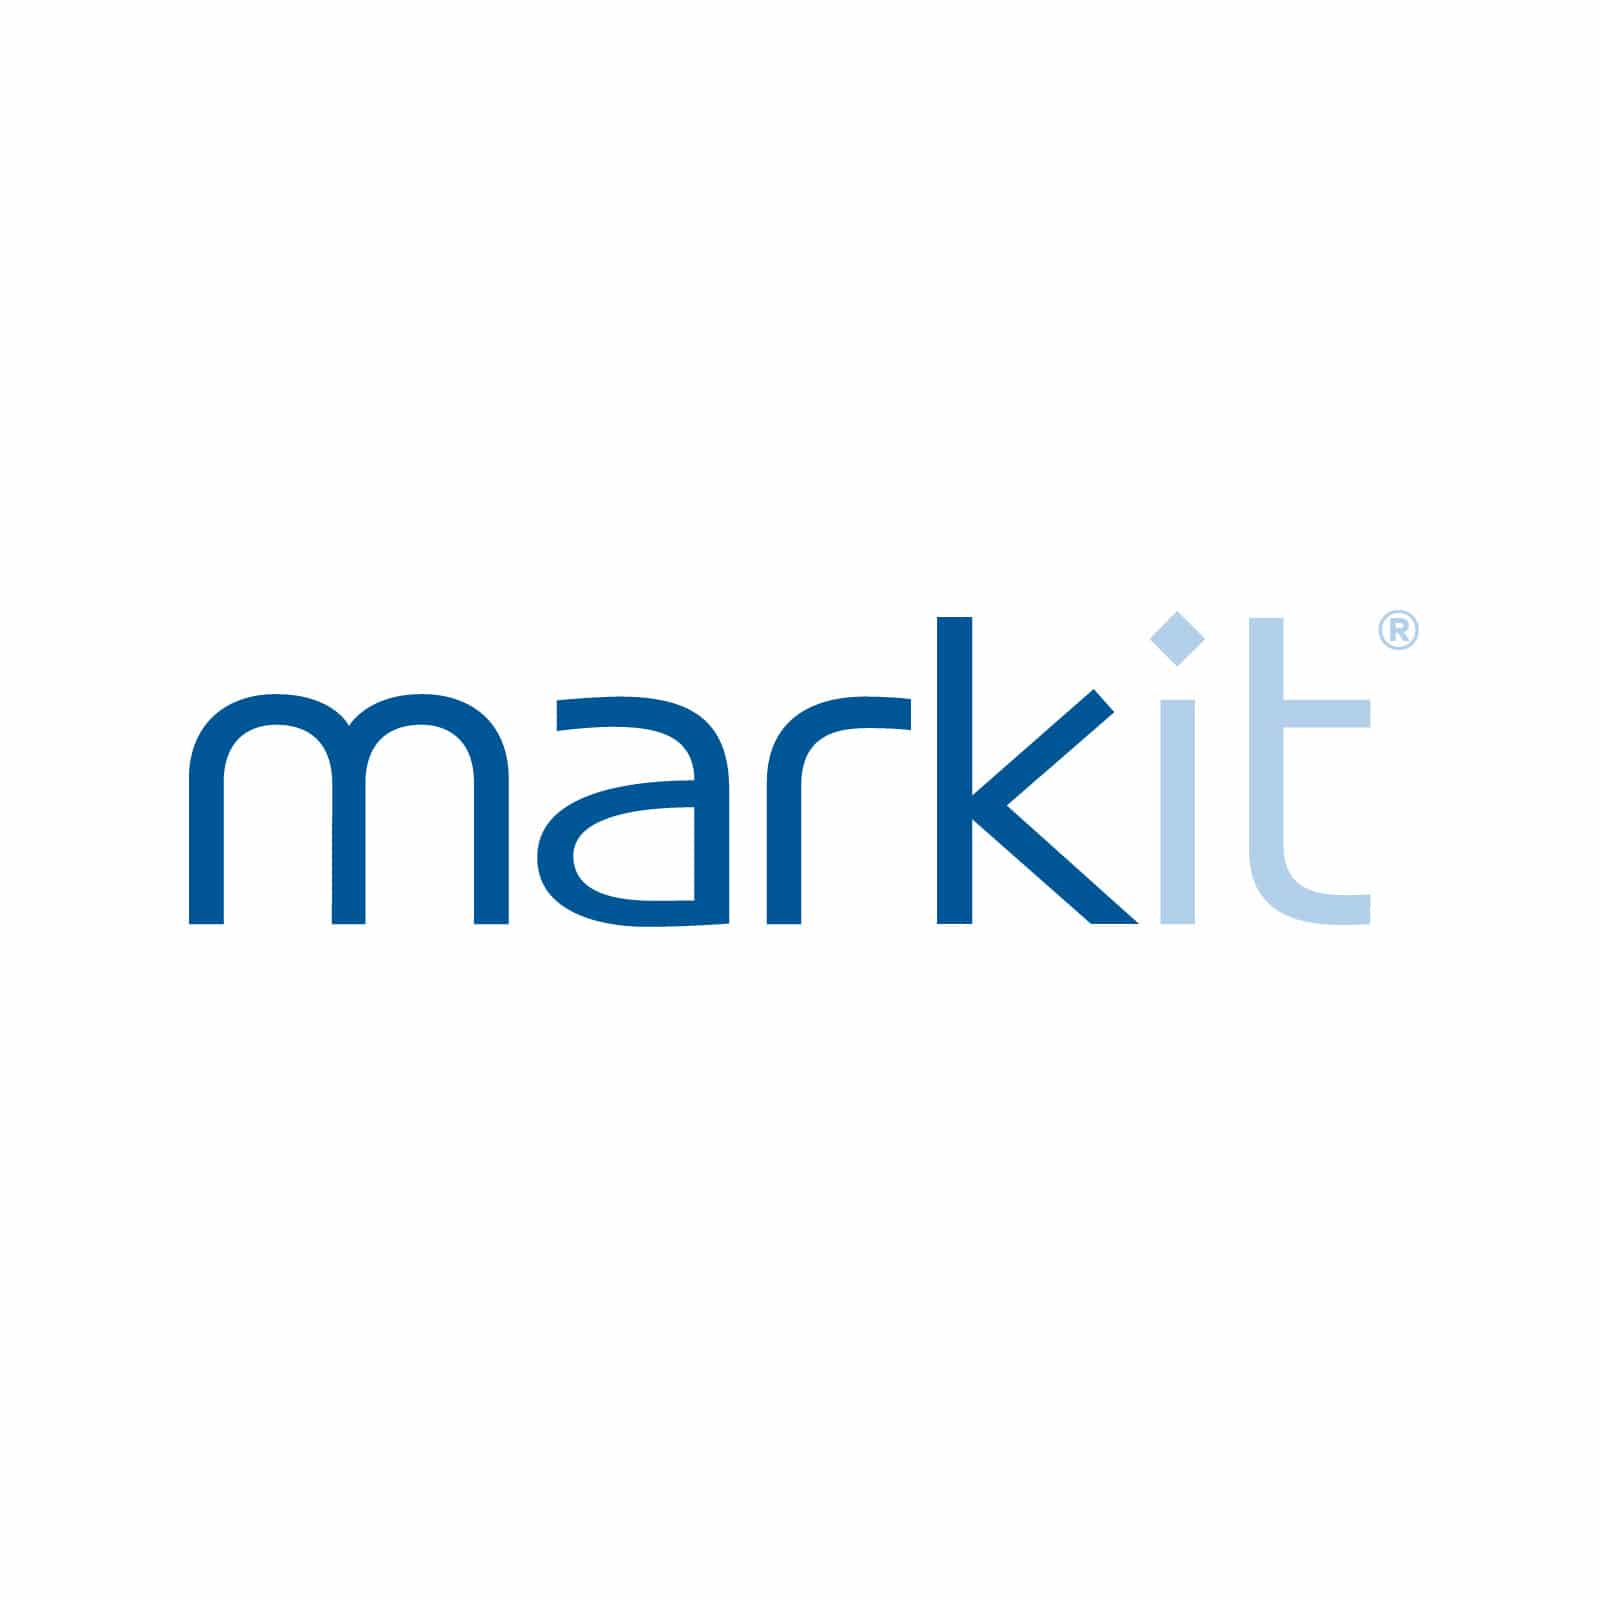 Markit Releases Third Quarter Operating Figures, Revenues Swell 13.1% Year-over-Year